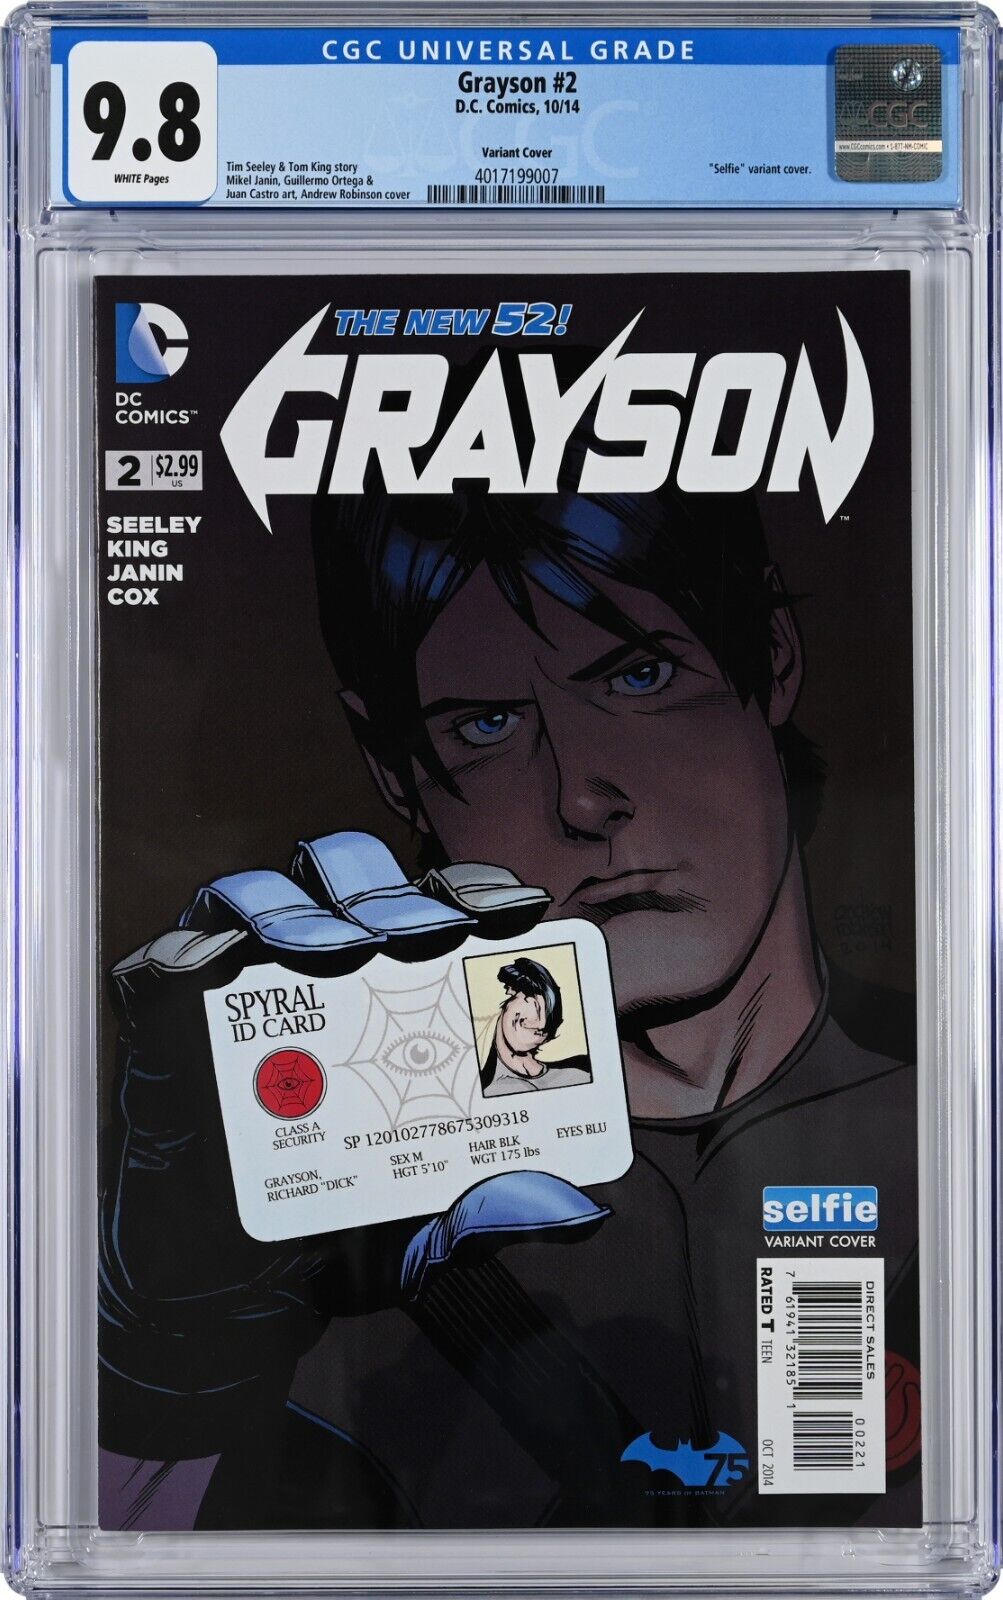 Grayson #2 CGC 9.8 (Oct 2014, DC) Tim Seeley Story Robinson Selfie Variant Cover